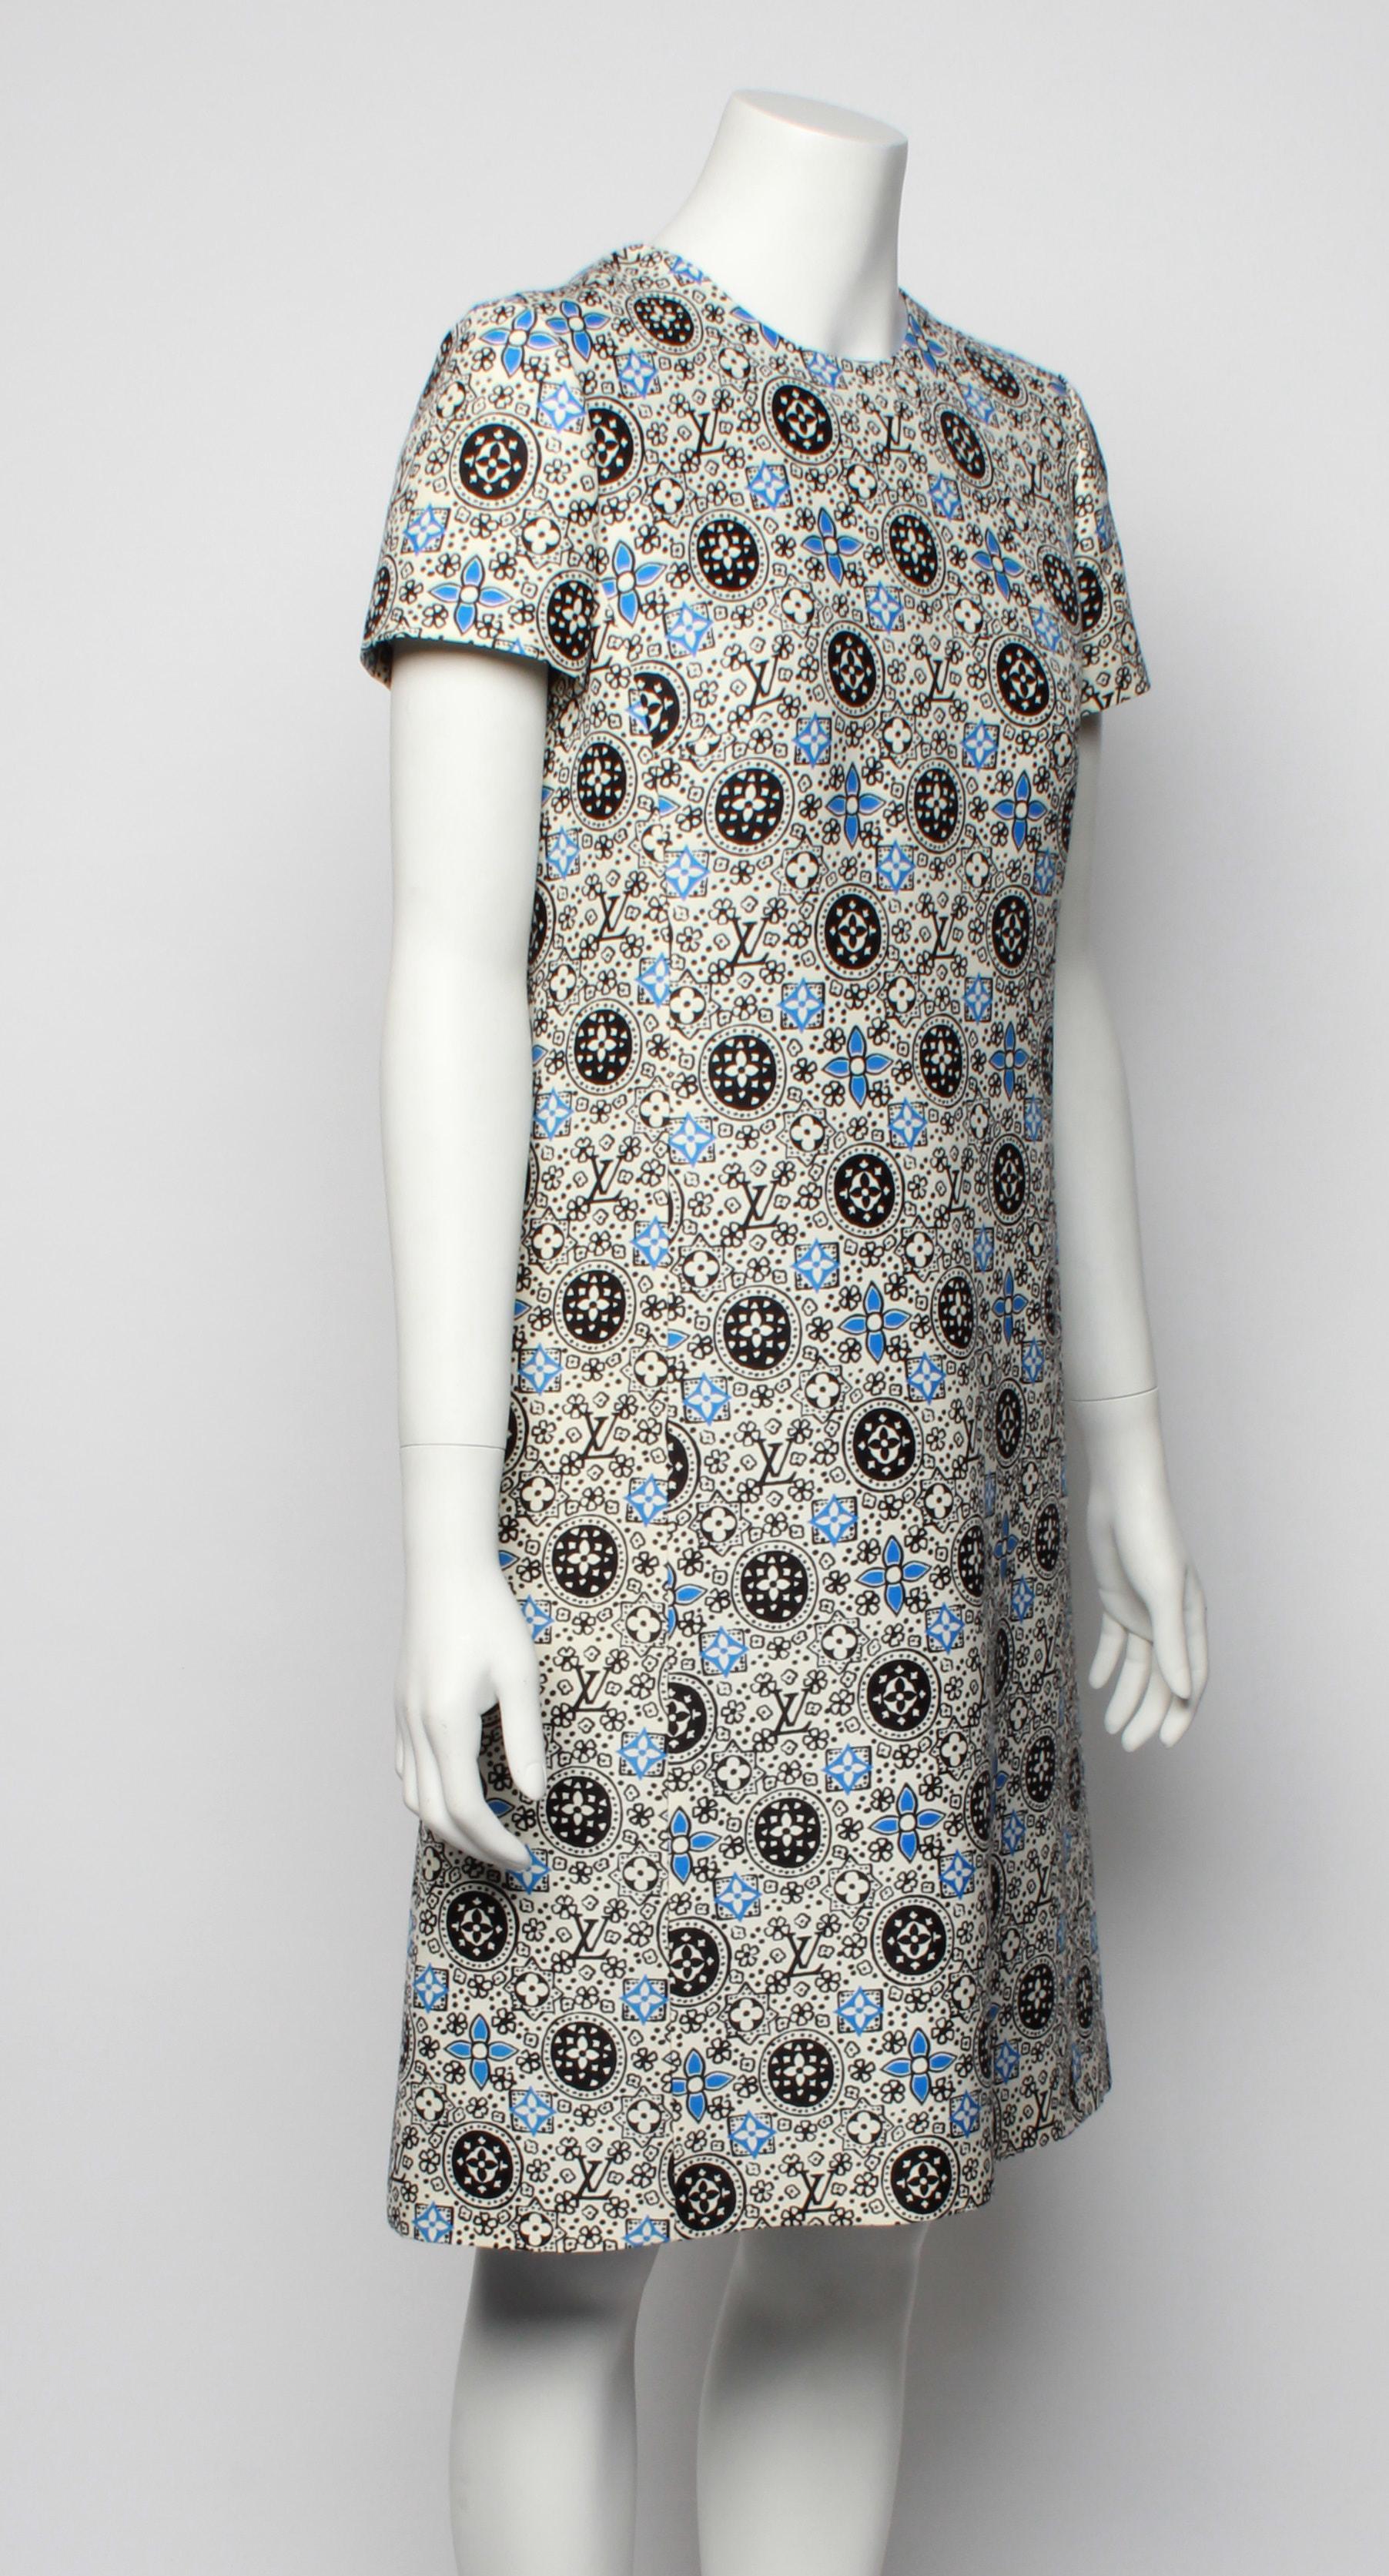 This short A-line dress is inspired by the styles of the 1960s and 70s printed in LV iconic logo and 4 petal flower. White base with black and blue print. 
Features short sleeve, exposed metal zipper with LV branding and contrast turquoise lining.
